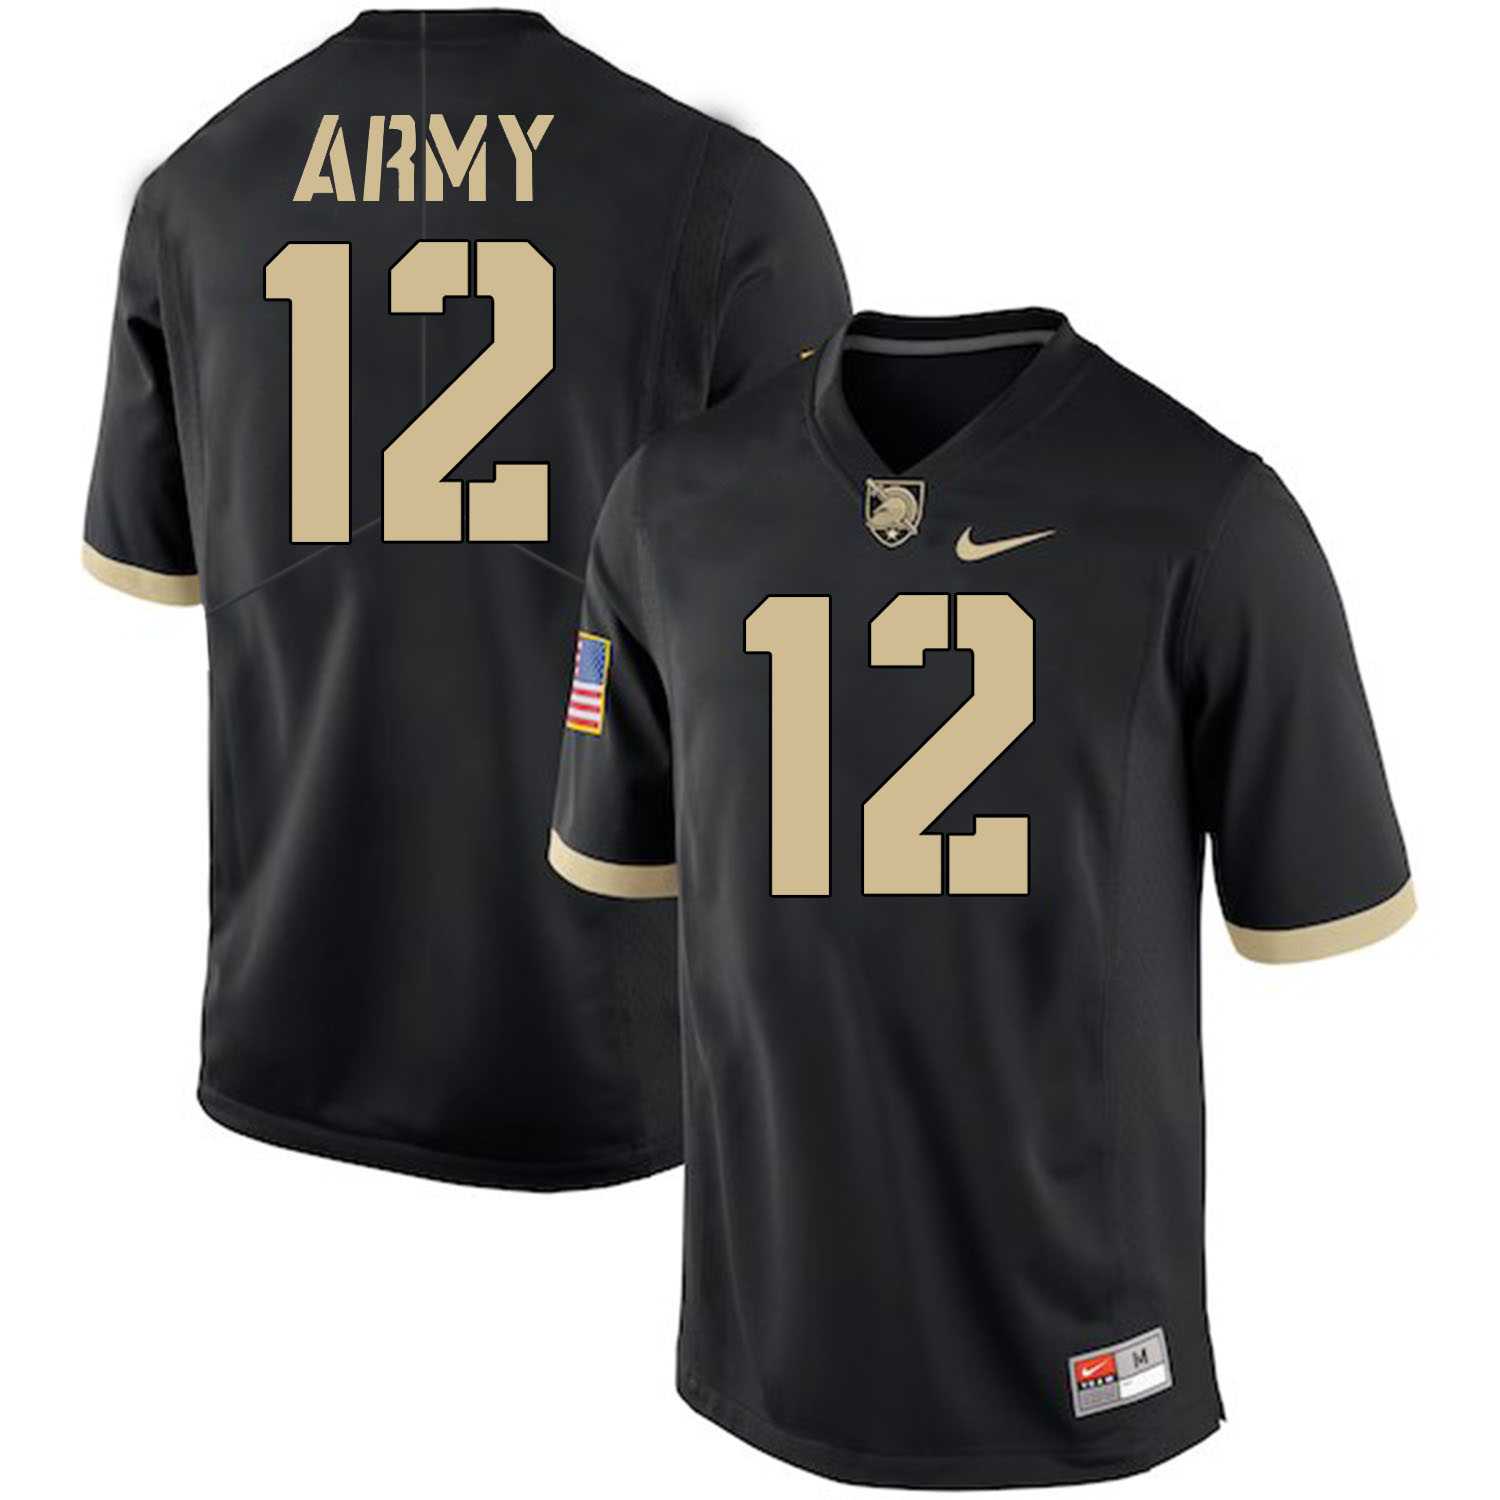 Army Black Knights #12 Army Black College Football Jersey